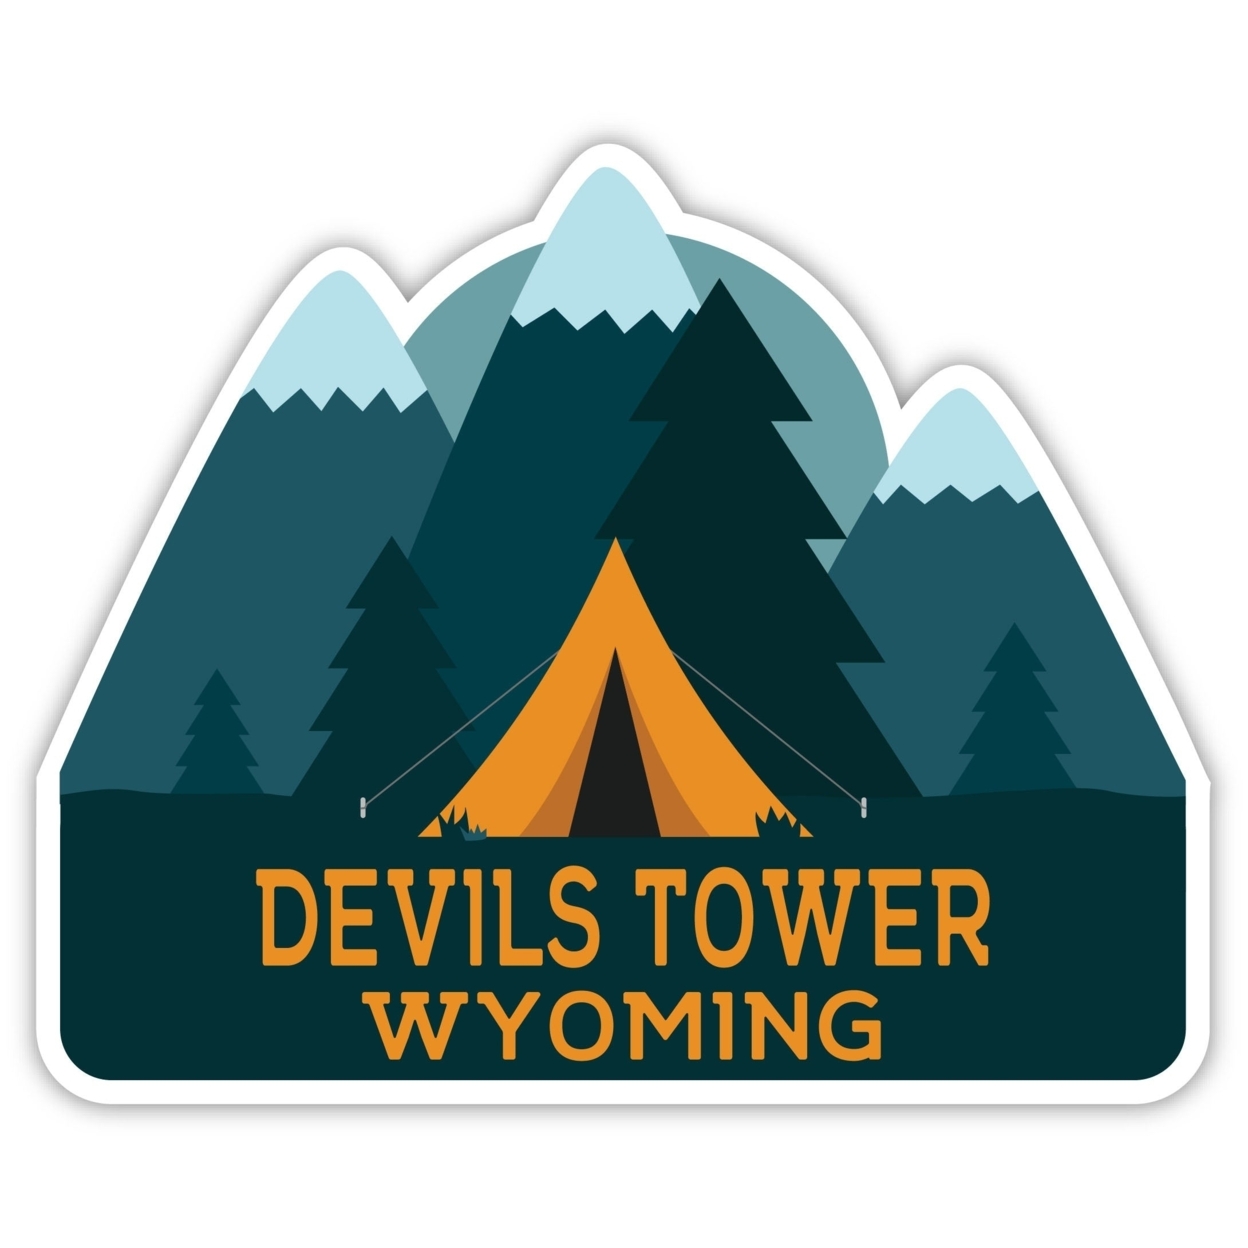 Devils Tower Wyoming Souvenir Decorative Stickers (Choose Theme And Size) - Single Unit, 4-Inch, Tent